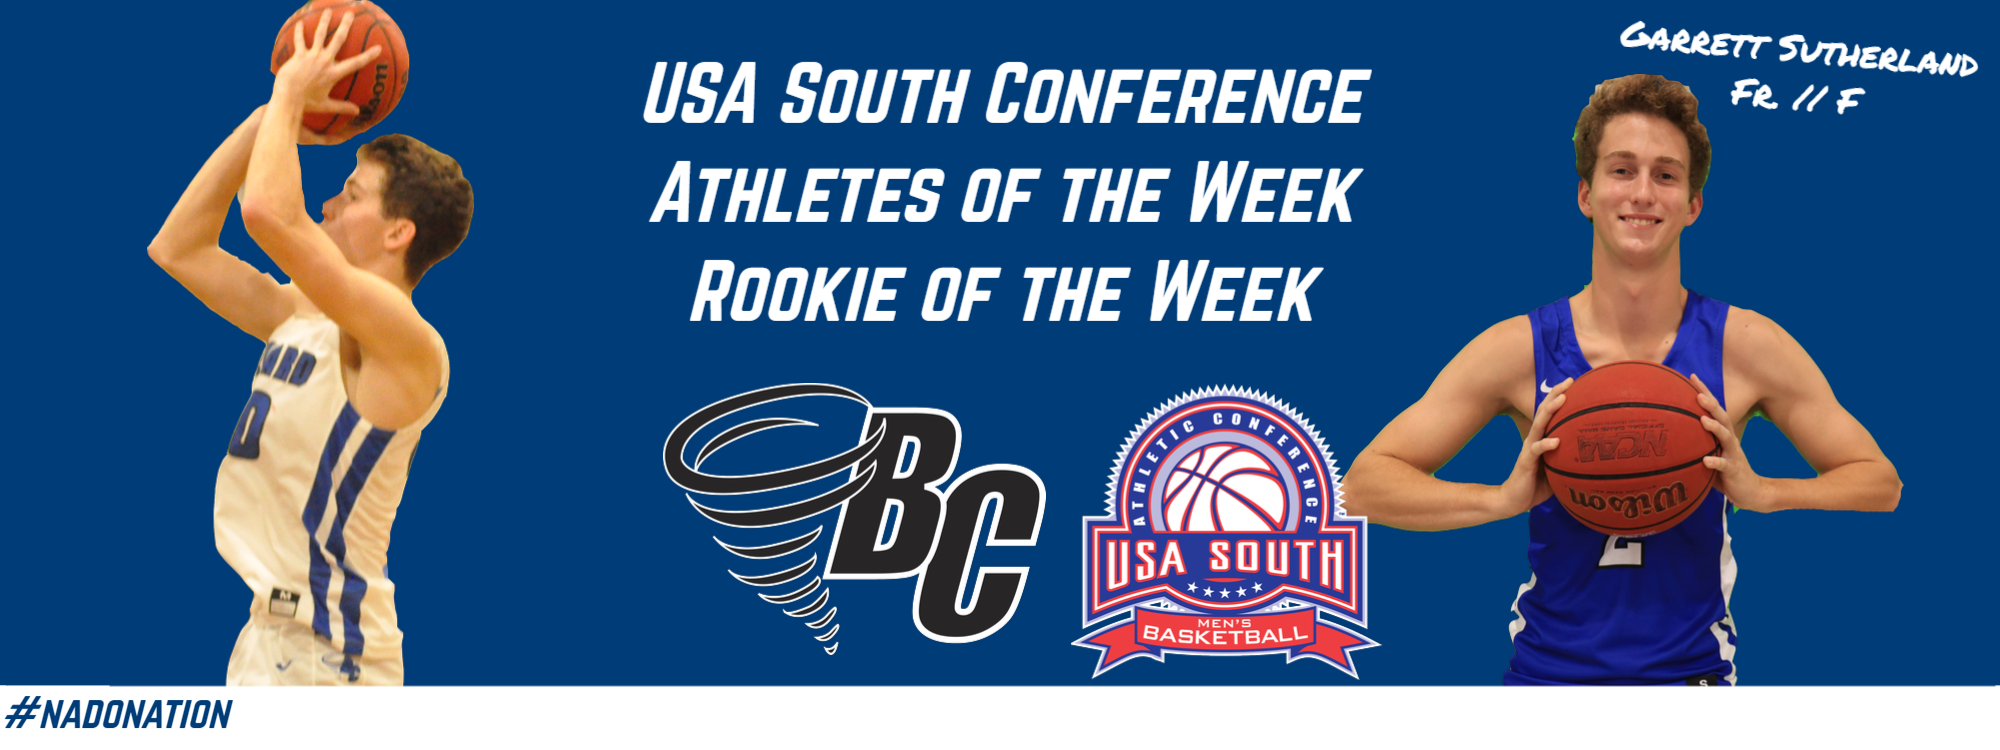 Sutherland Named USA South’s Rookie of the Week